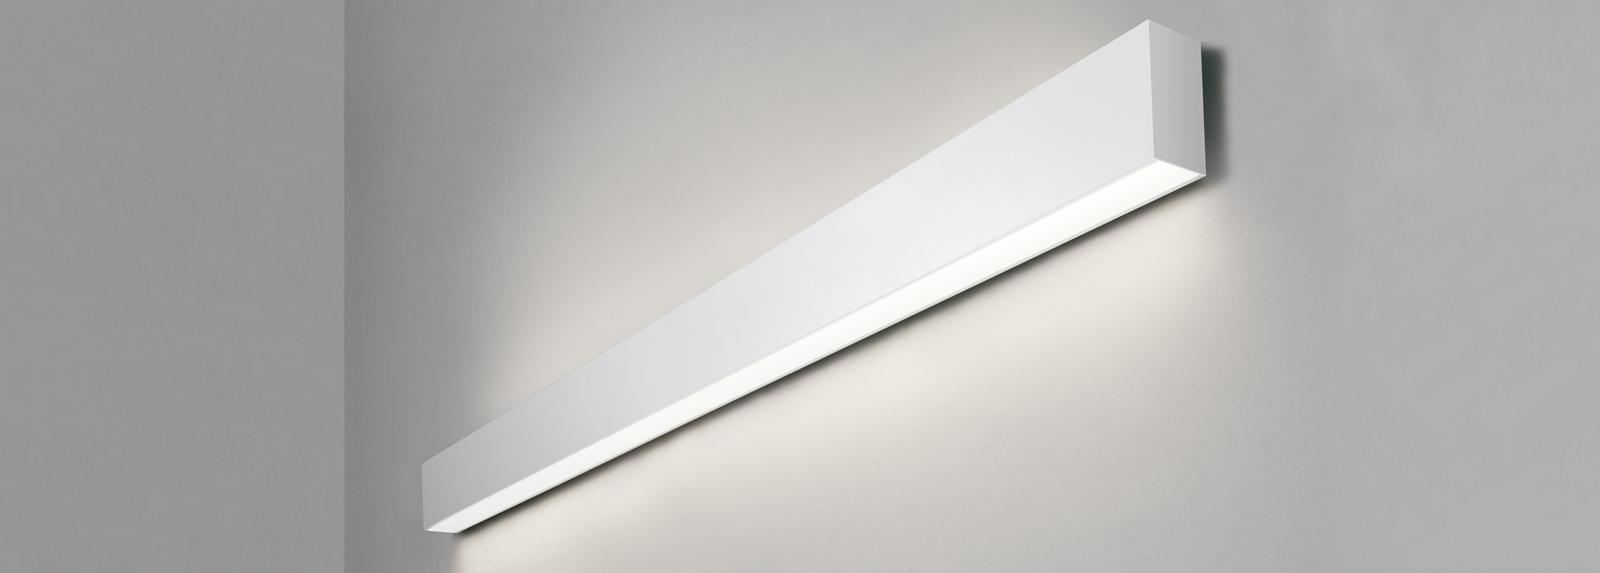 TIRET 700 | Two sided-emission wall-mounted linear luminaires